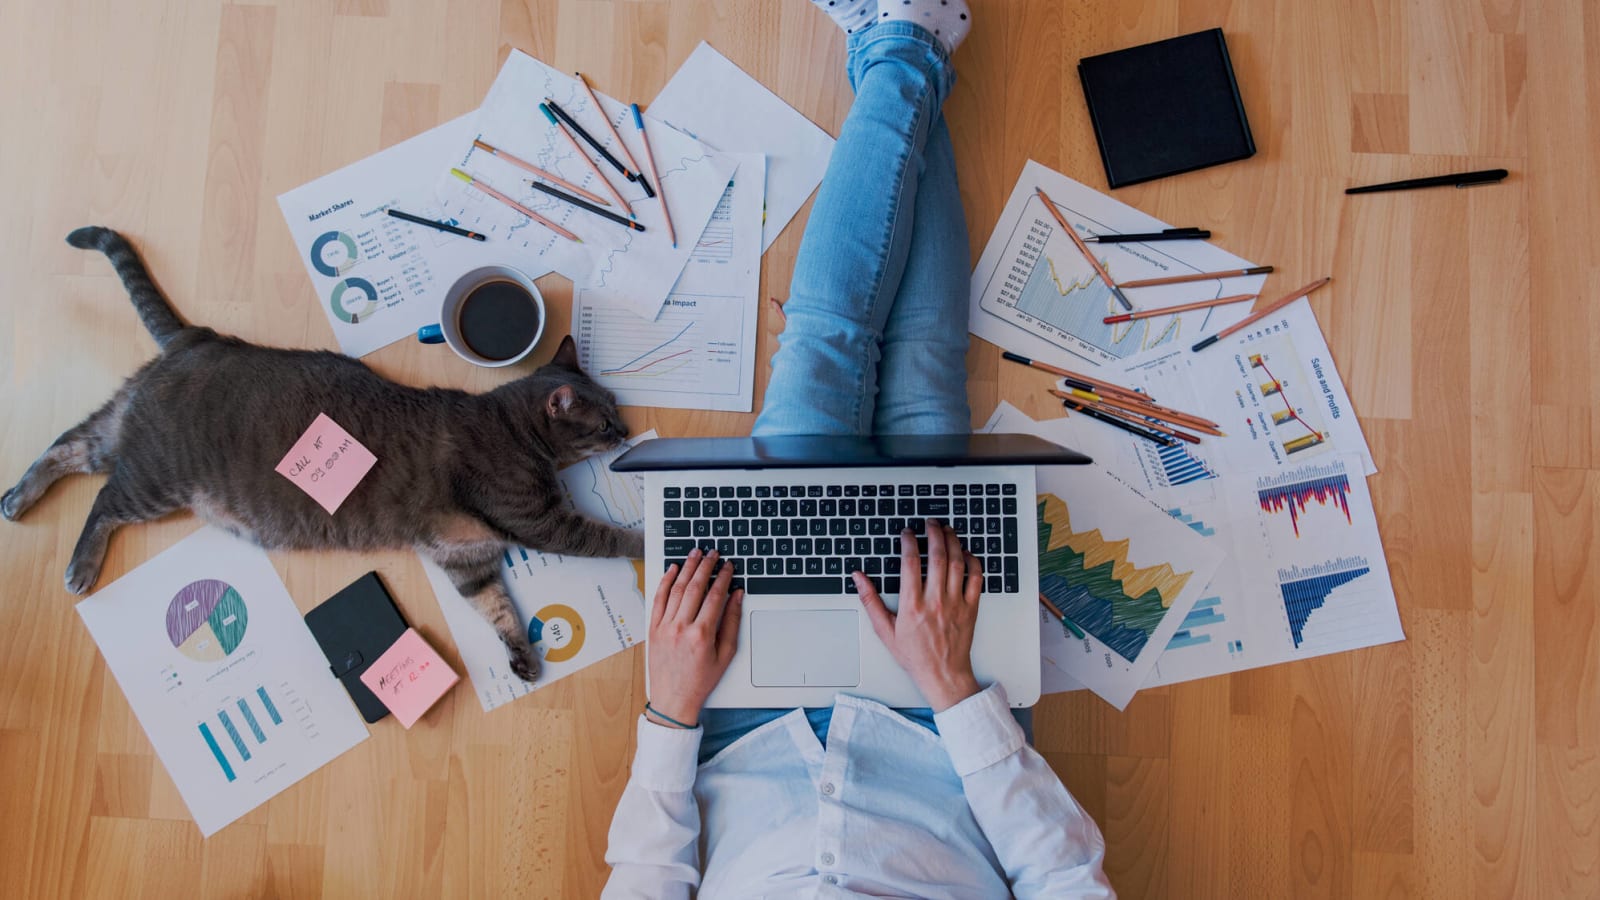 Out of office: 18 essential tips for working at home